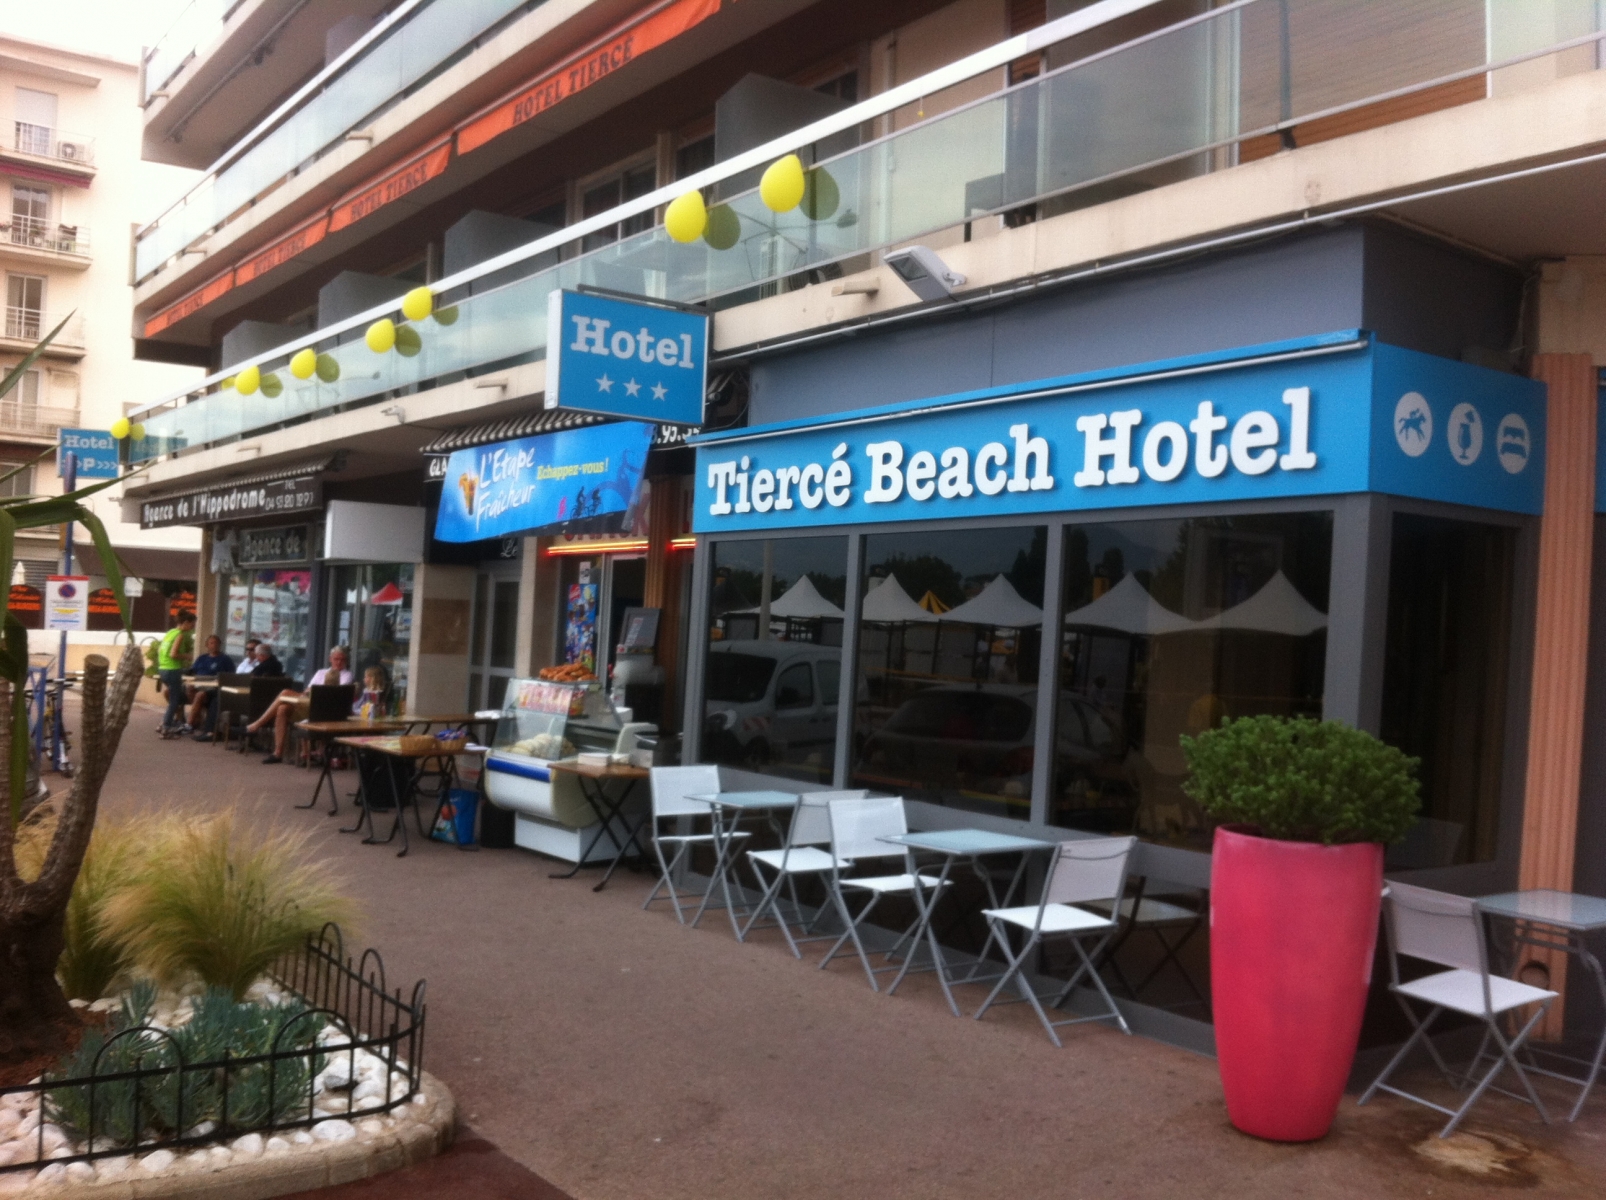 Tierce Beach Hotel <br/>99.00 ew <br/> <a href='http://vakantieoplossing.nl/outpage/?id=ed96f1fb4aaa4c554b6dabb3e713f2ee' target='_blank'>View Details</a>